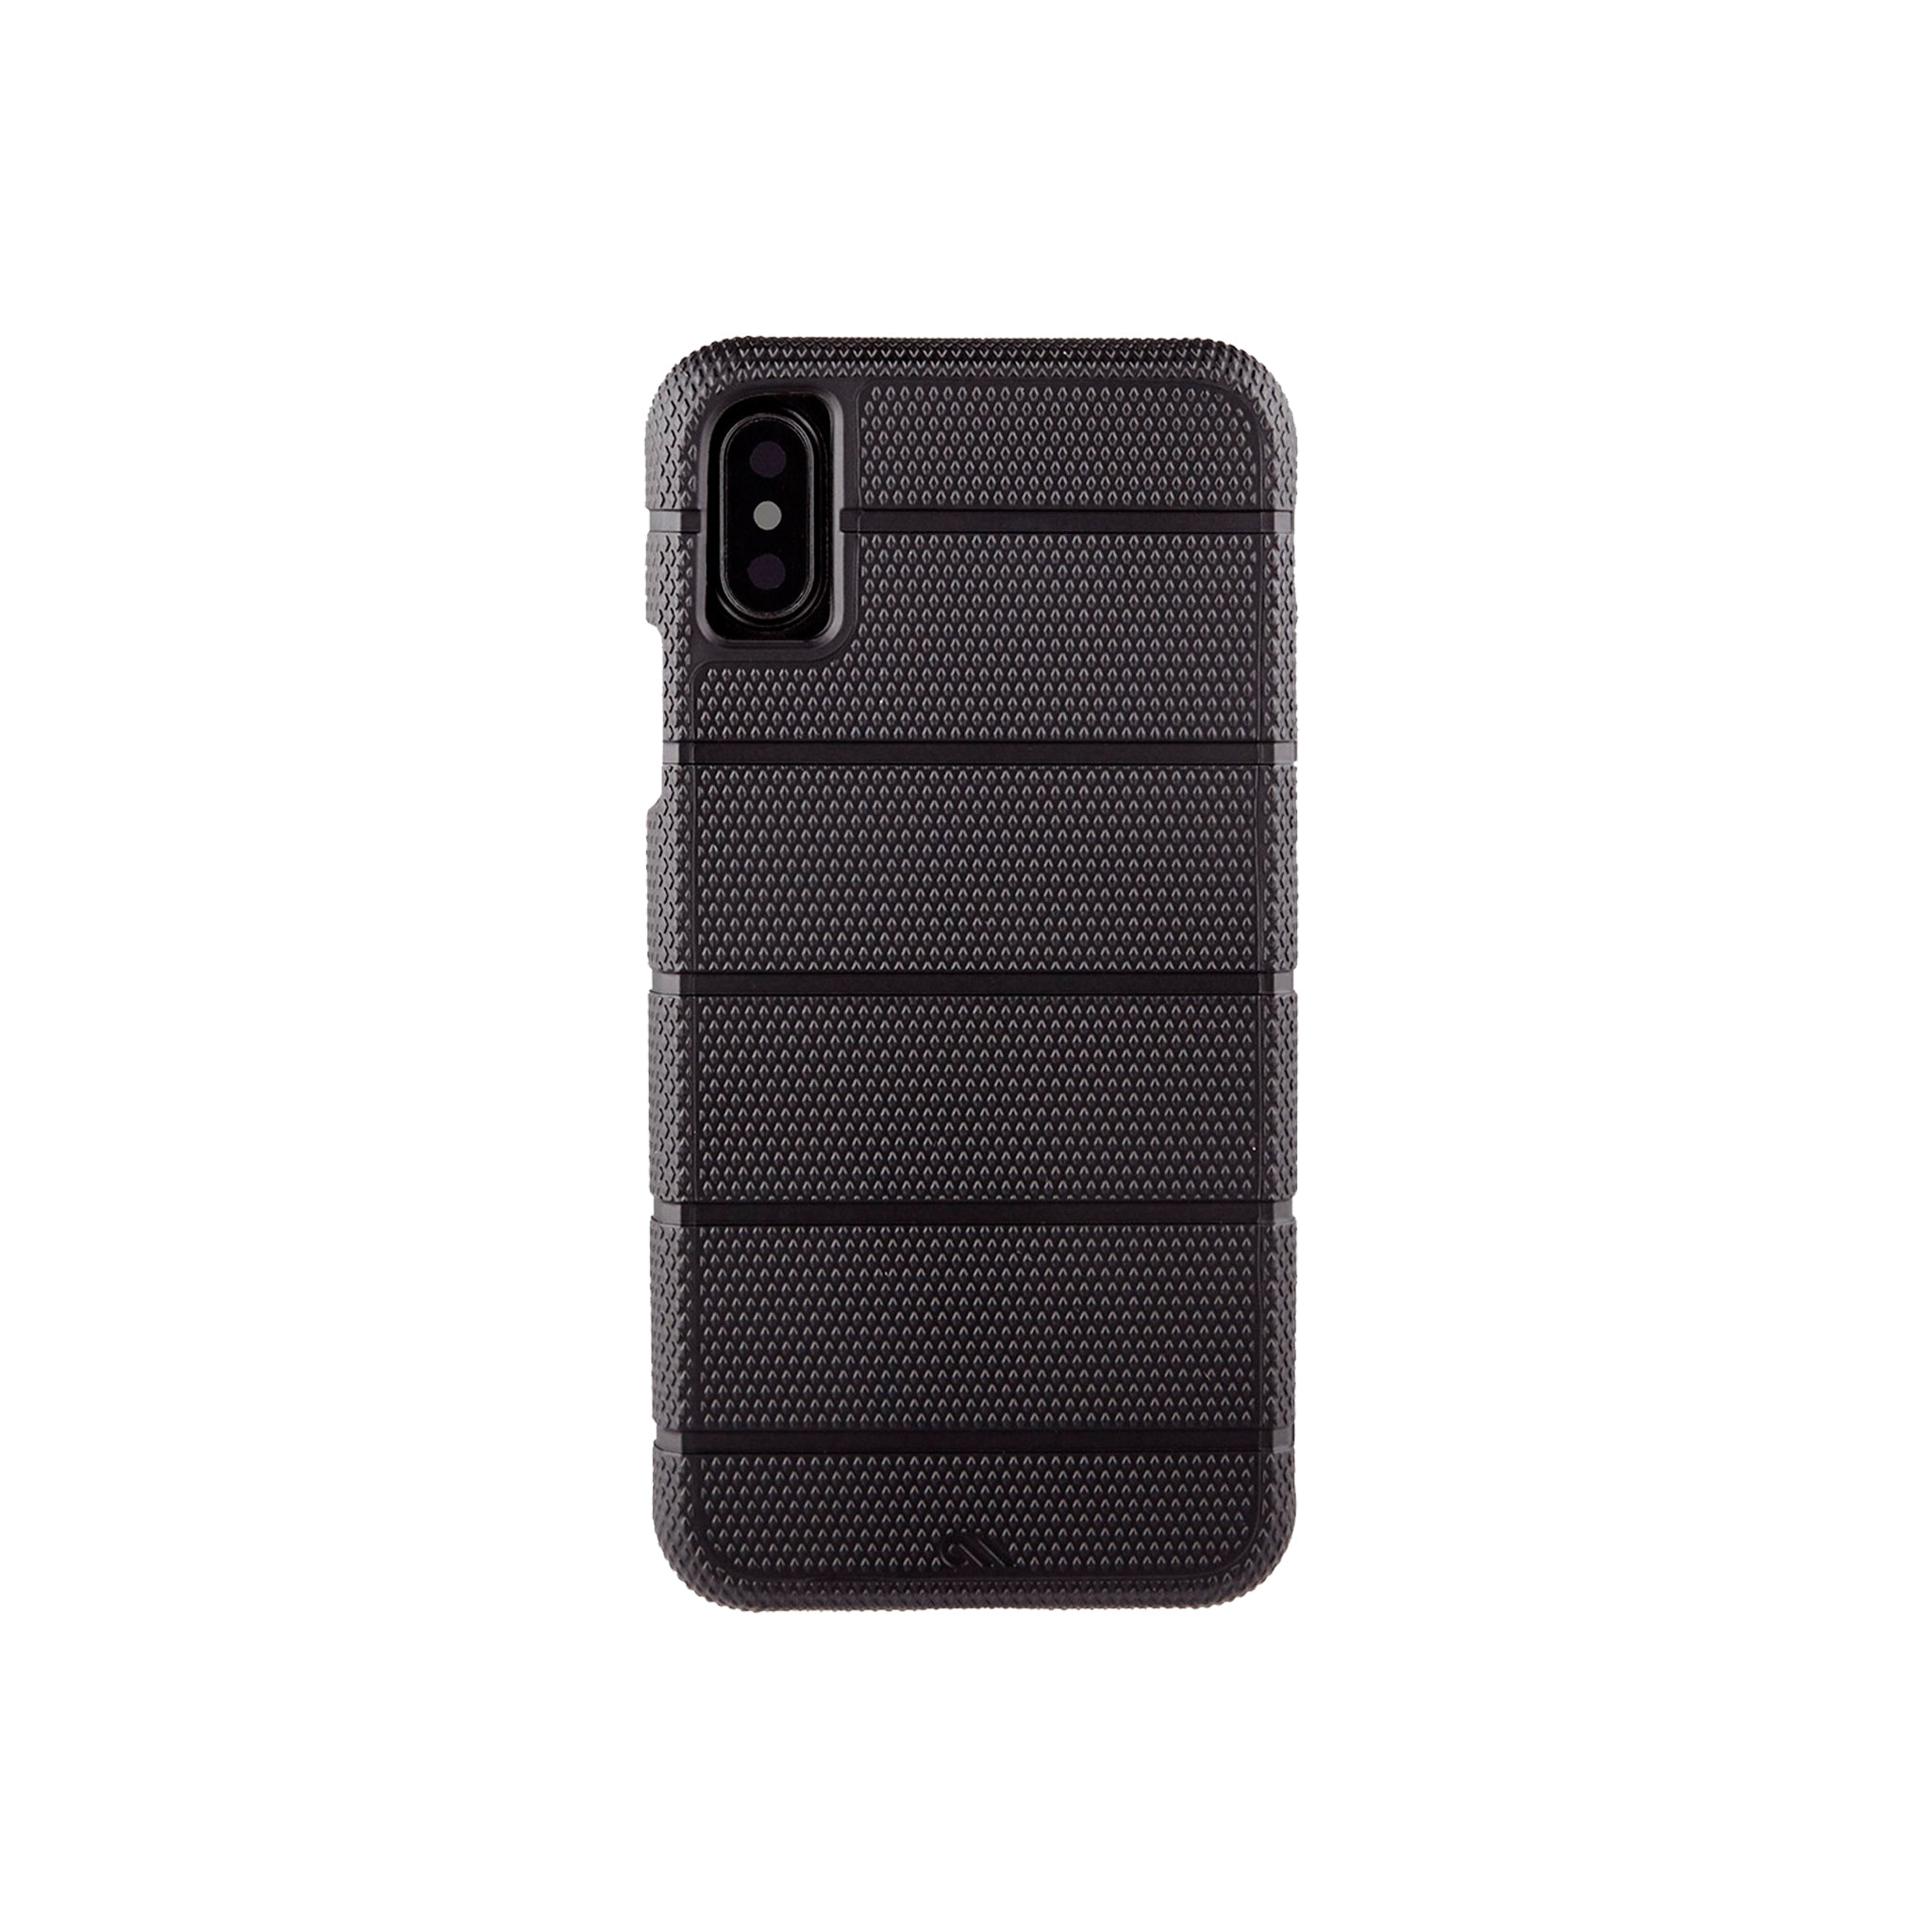 Case-Mate - Tough Mag Case for Apple iPhone XS / X - Black